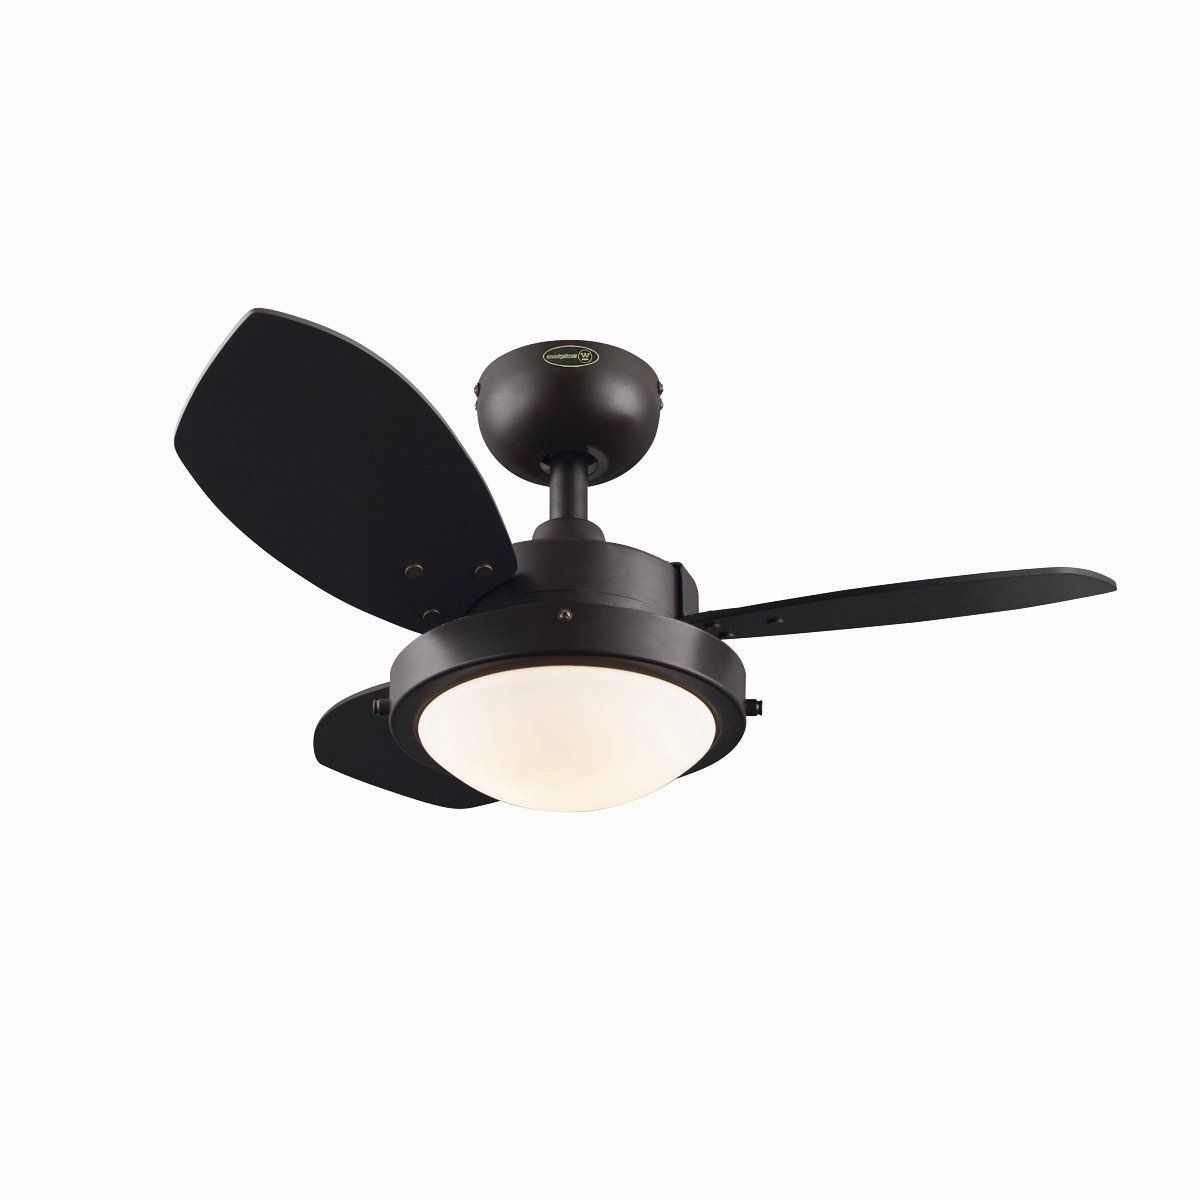 Recent 30" Heskett 3 Blade Led Ceiling Fan With Light Kit Included Within Heskett 3 Blade Led Ceiling Fans (View 2 of 20)